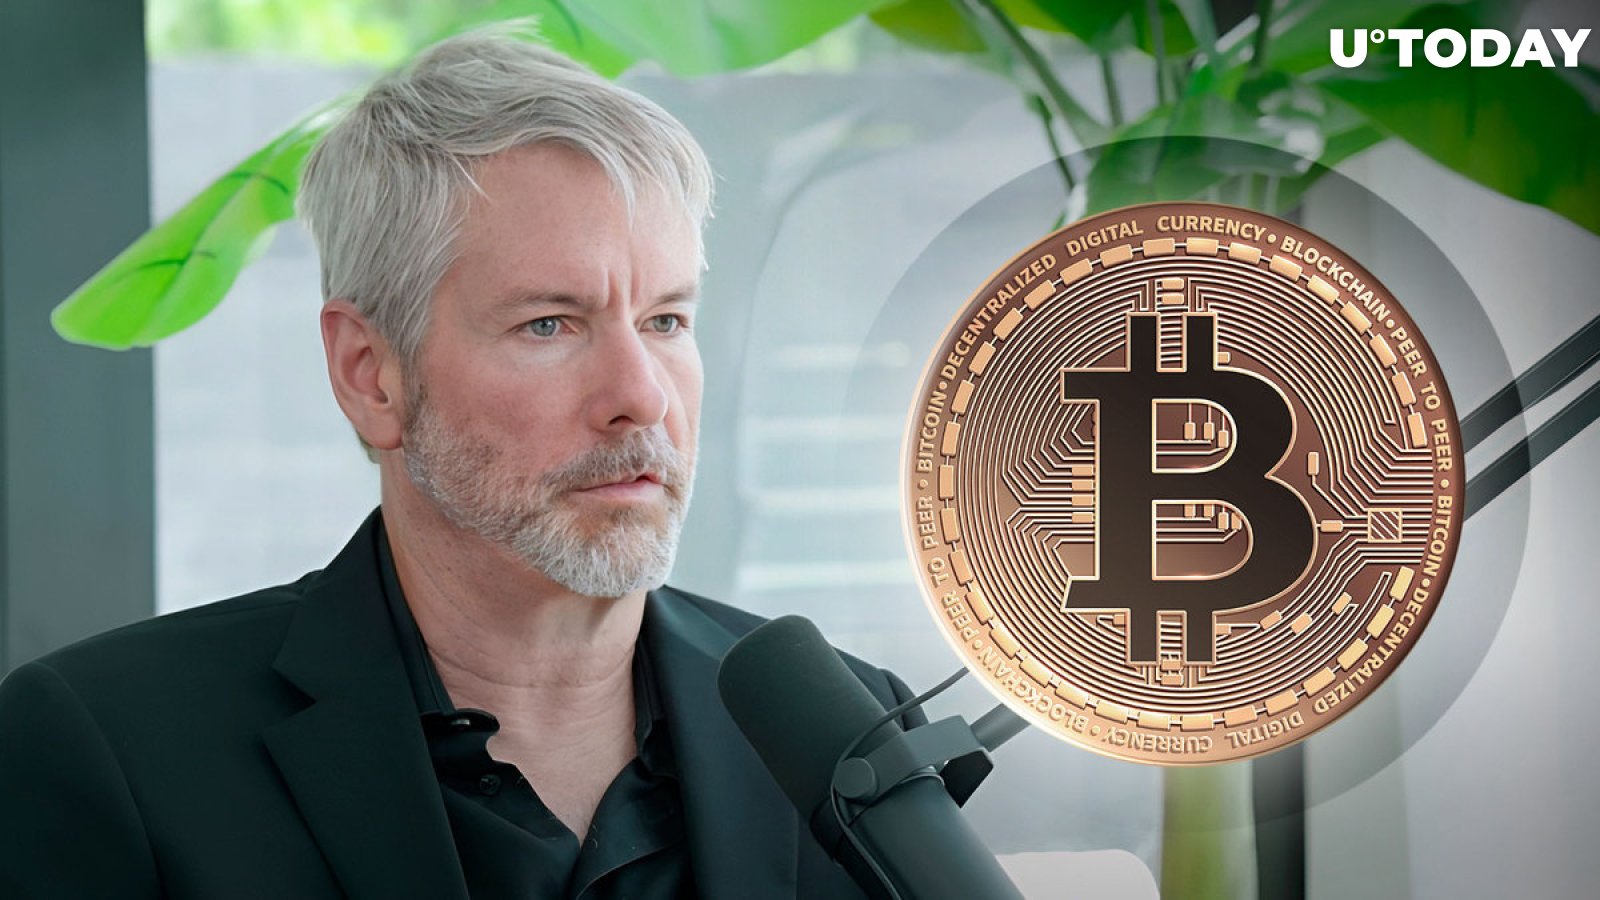 Bitcoin 'Mortal Combat' Bullish Message Issued by Michael Saylor, BTC Community Excited